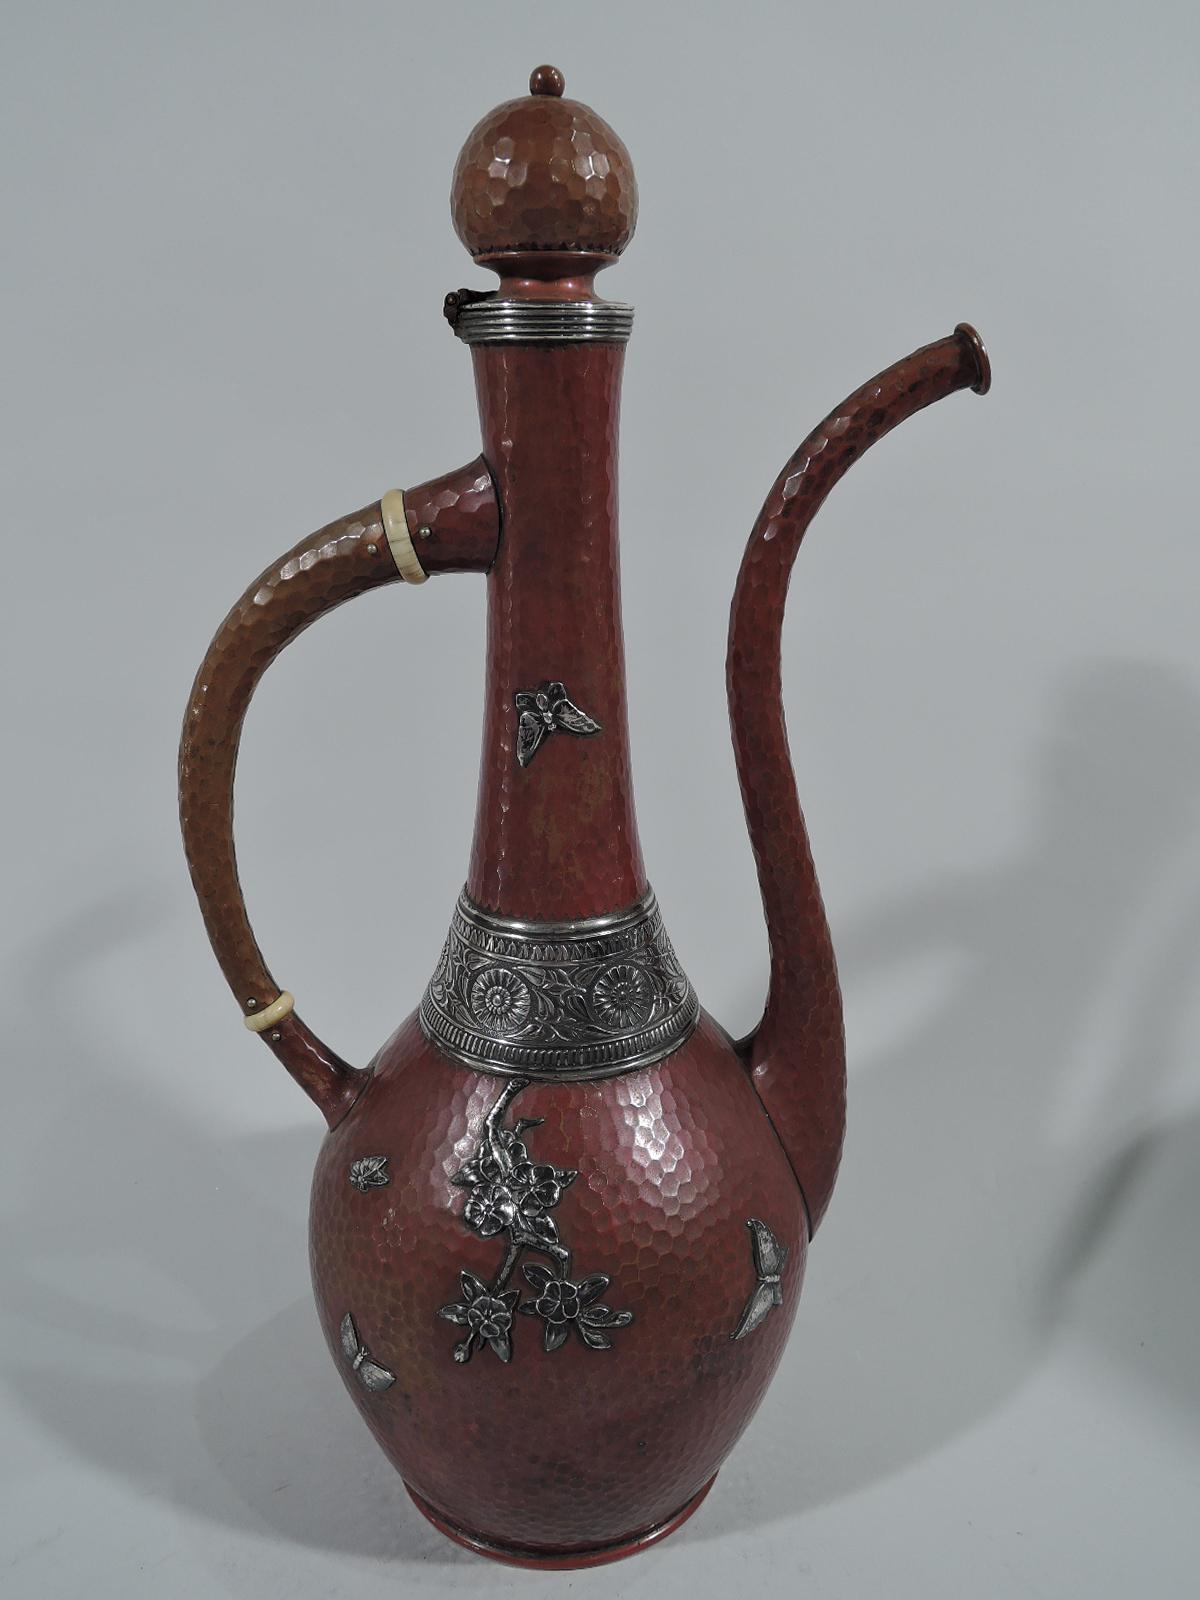 Mixed metal copper and silver Turkish coffeepot with Japonesque ornament. Made by Gorham in Providence in 1882.

Traditional copper vessel comprising ovoid body, S-scroll spout, c-scroll handle, cylindrical neck, and hinged onion-dome cover. Applied